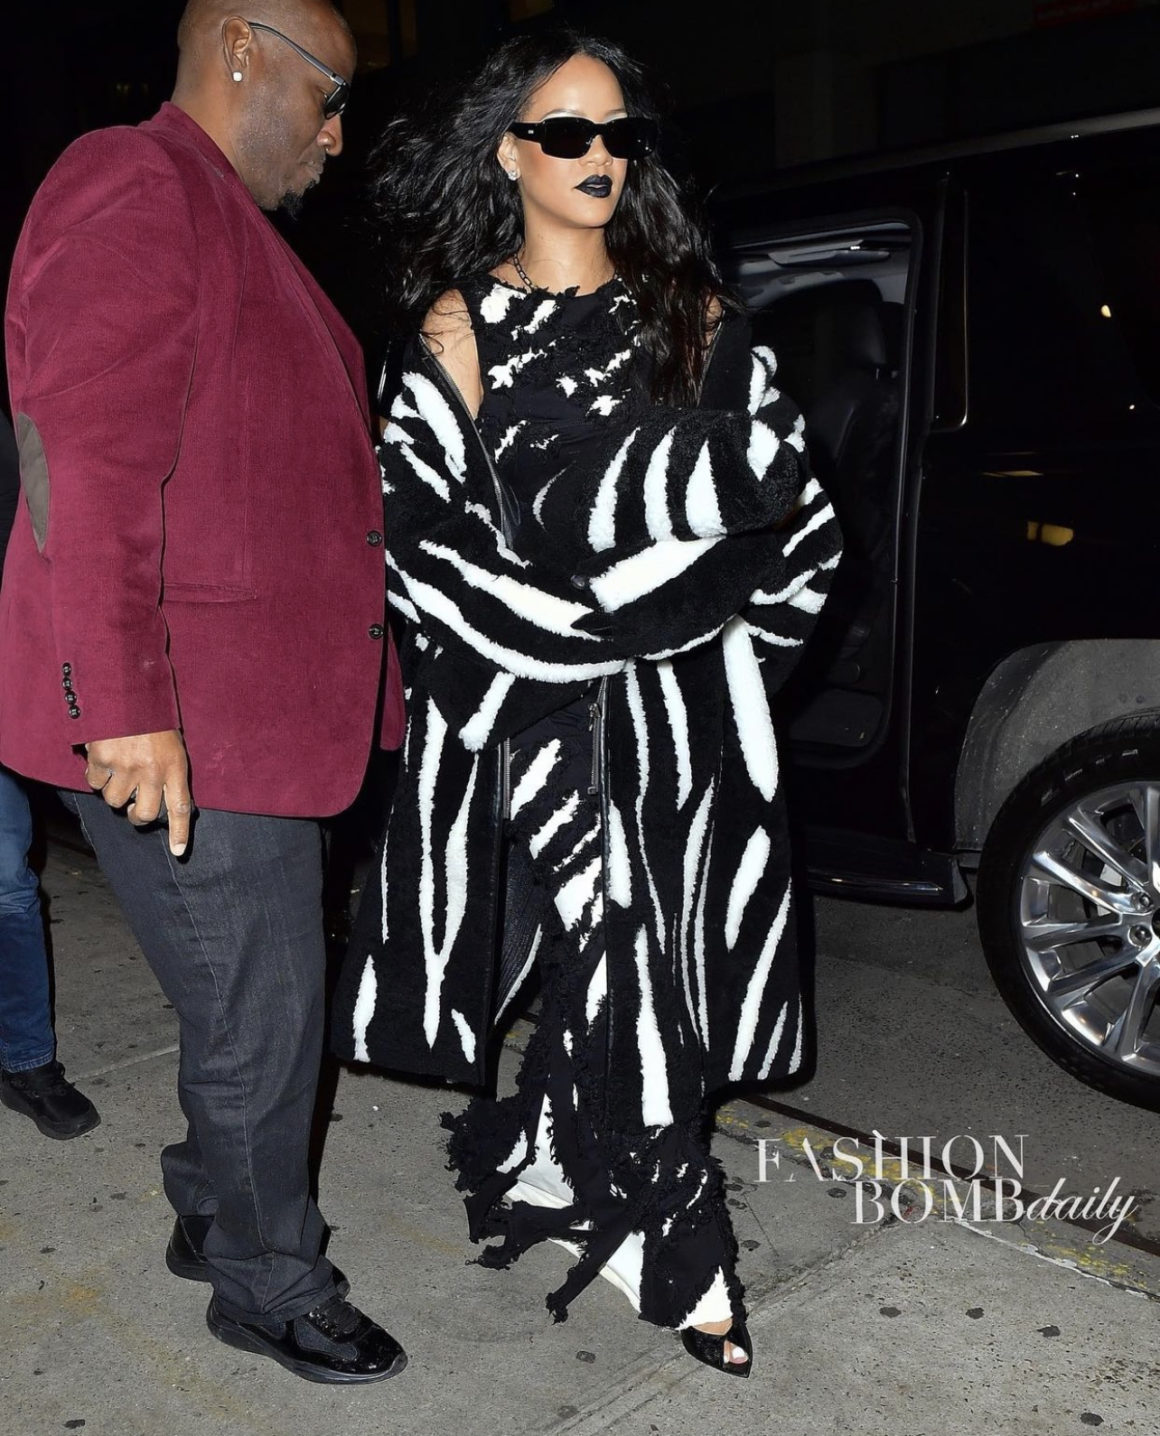 Rihanna Wears Rick Owens Black and White Distressed Dress and Coat While  Heading to Halloween Party in NYC – Fashion Bomb Daily